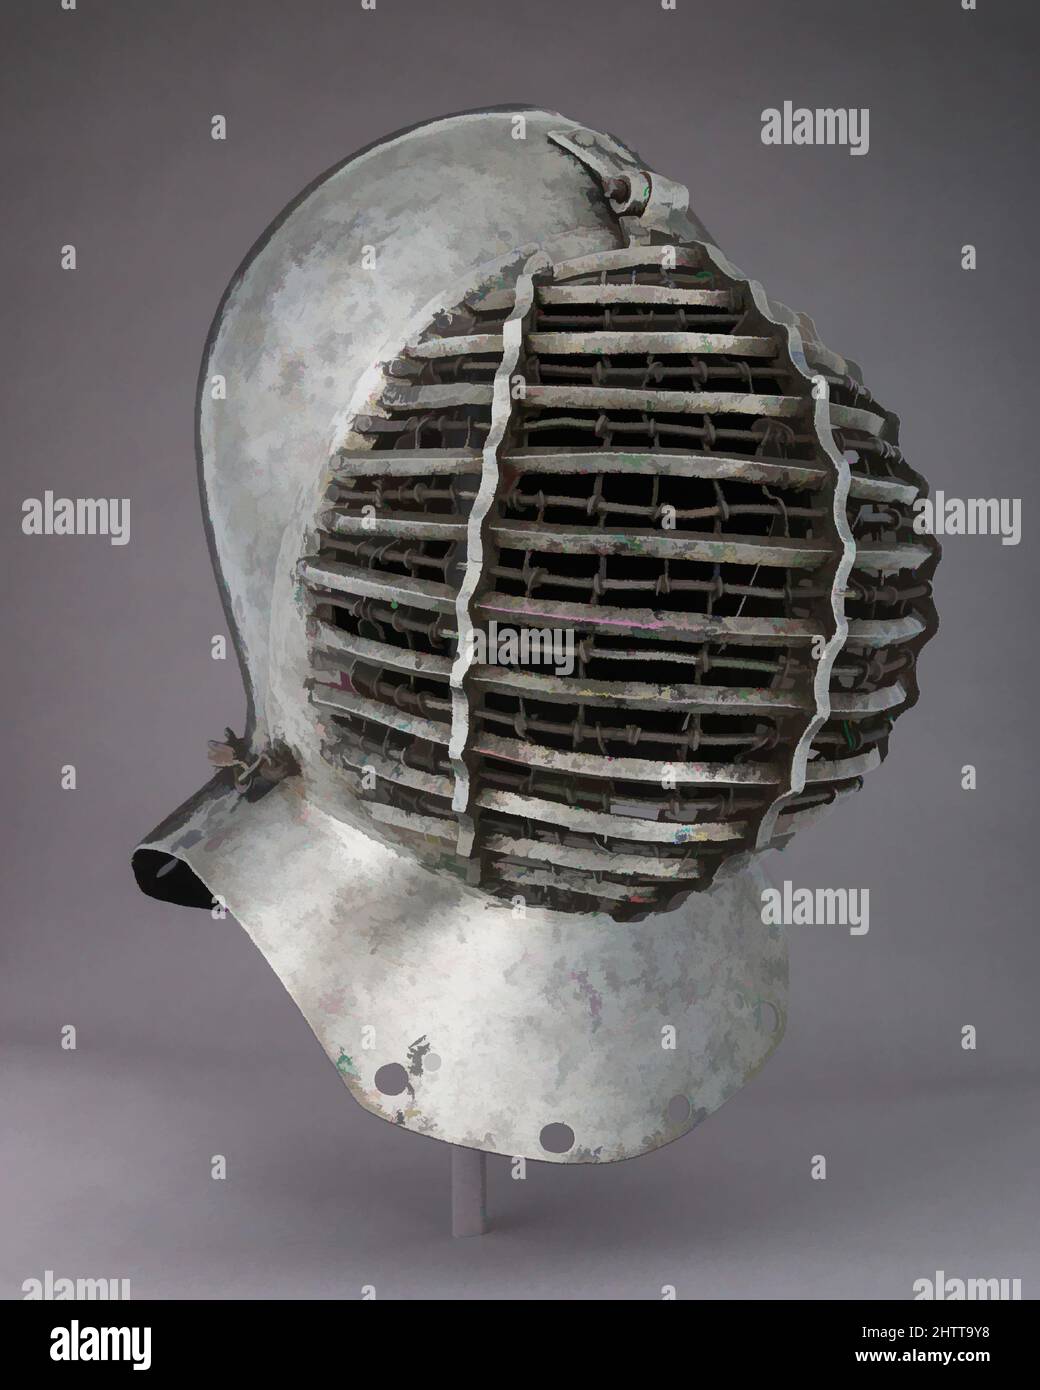 Art inspired by Tournament Helm (Kolbenturnierhelm), 1510, German, Steel, H. 15 1/8 in. (38.4 cm); W. 10 in. (25.4 cm); D. 13 5/8 in. (34.6 cm); Wt. 10 lb. 8 oz. (4763 g), Helmets, Classic works modernized by Artotop with a splash of modernity. Shapes, color and value, eye-catching visual impact on art. Emotions through freedom of artworks in a contemporary way. A timeless message pursuing a wildly creative new direction. Artists turning to the digital medium and creating the Artotop NFT Stock Photo